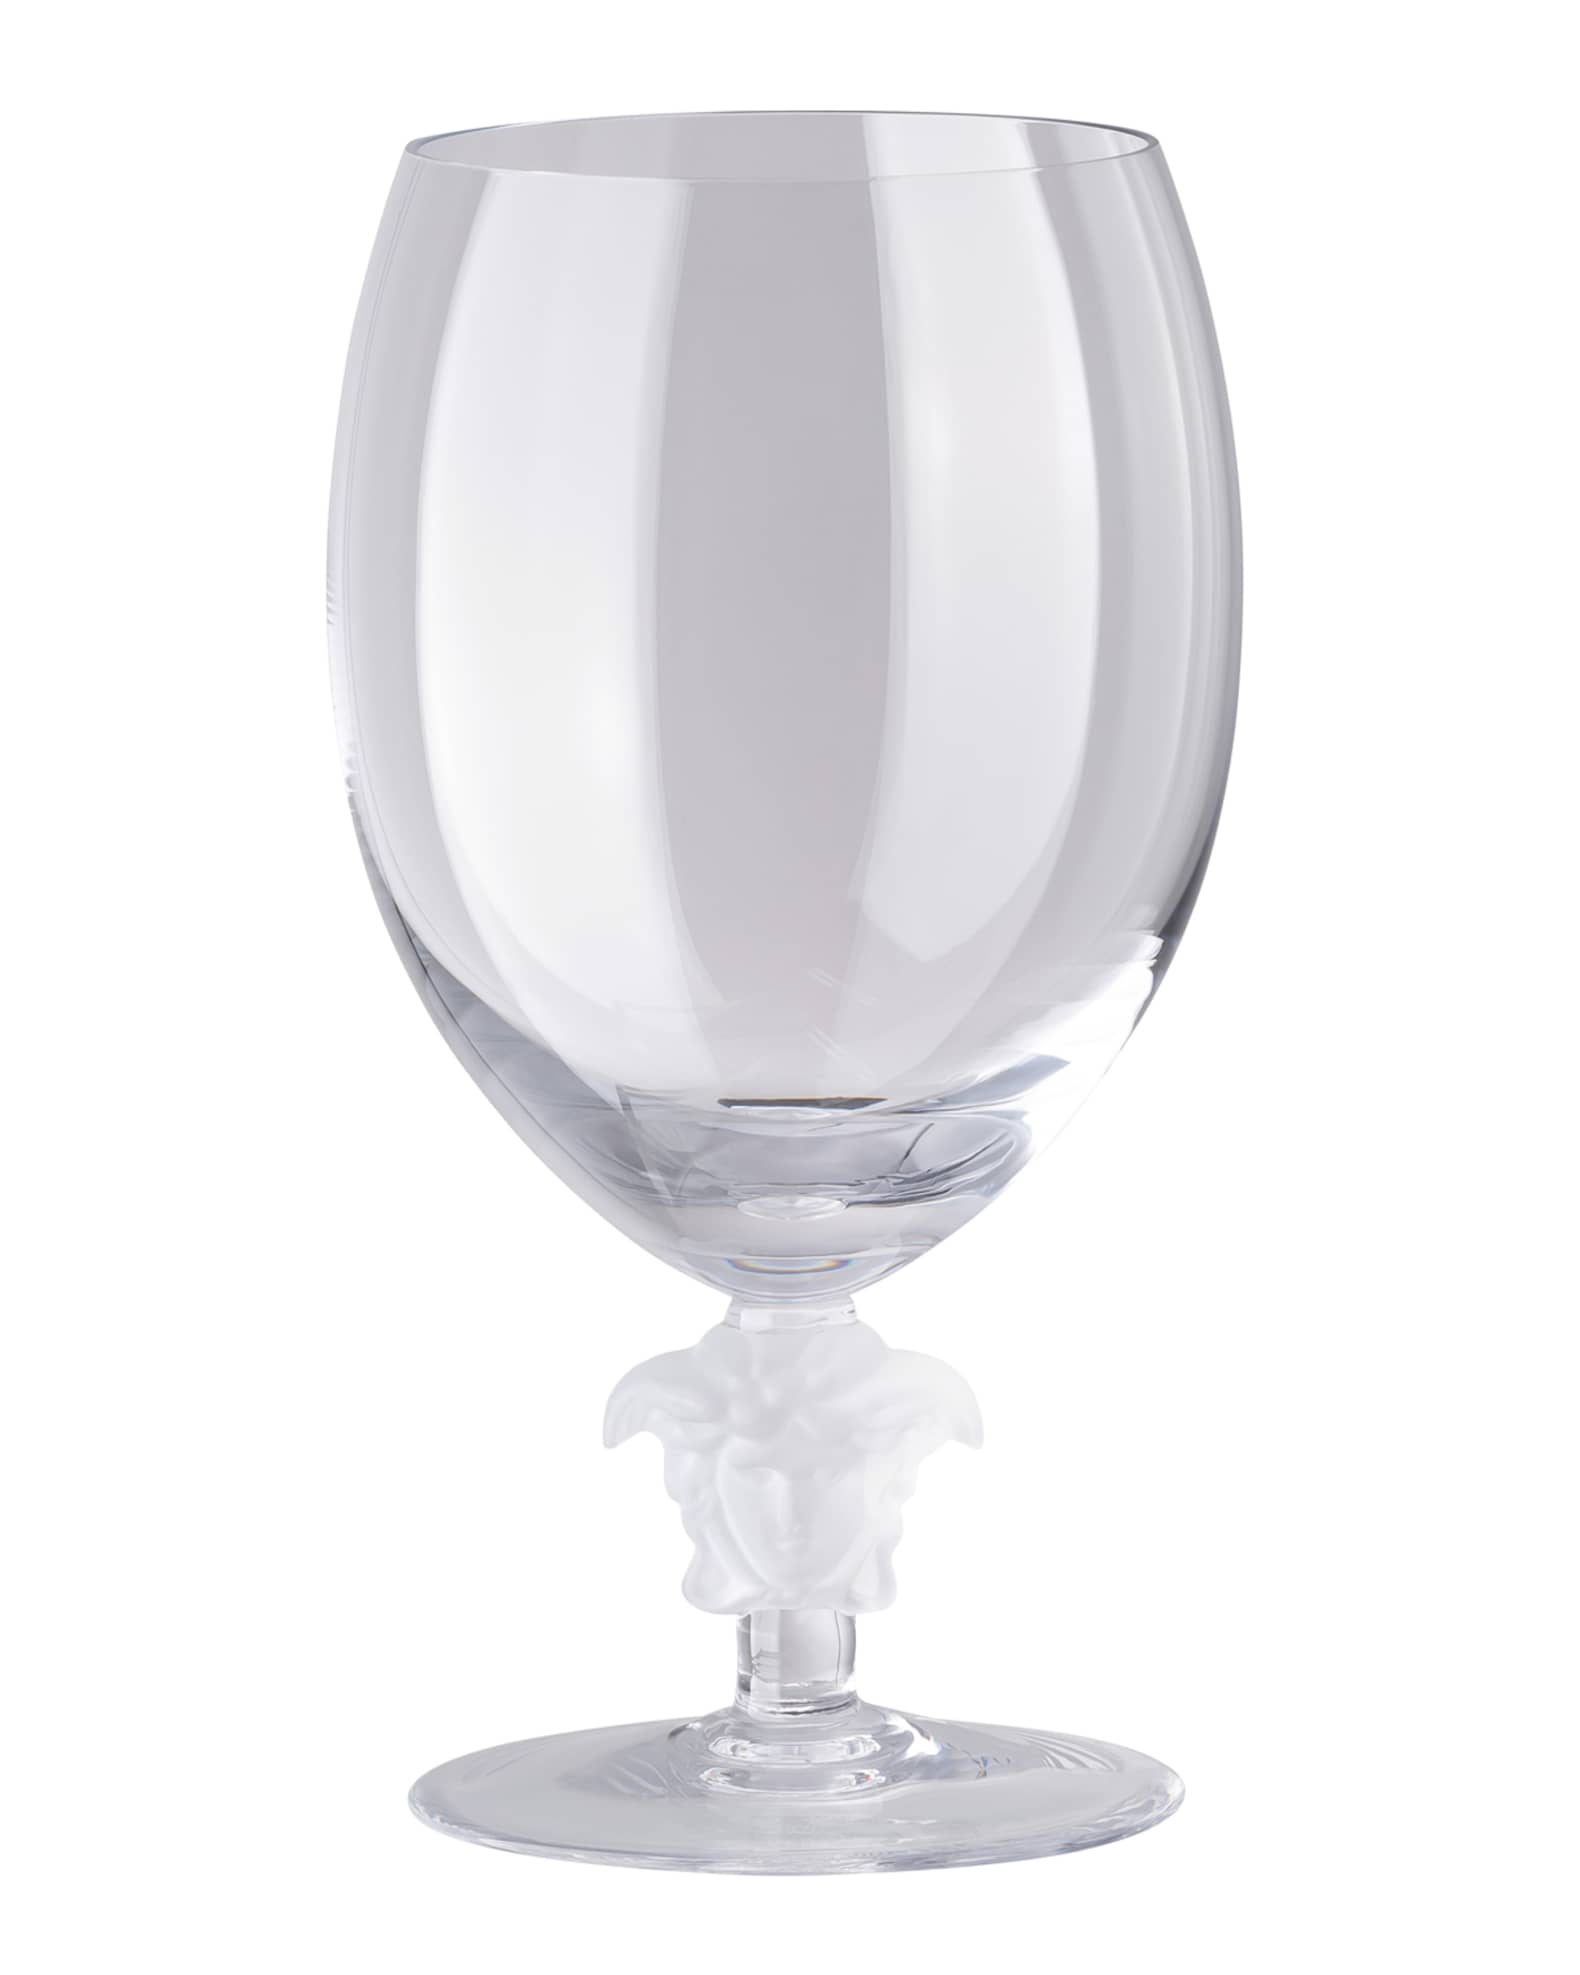 Buy the 5 Clear Crystal Short Stem Wine Glasses